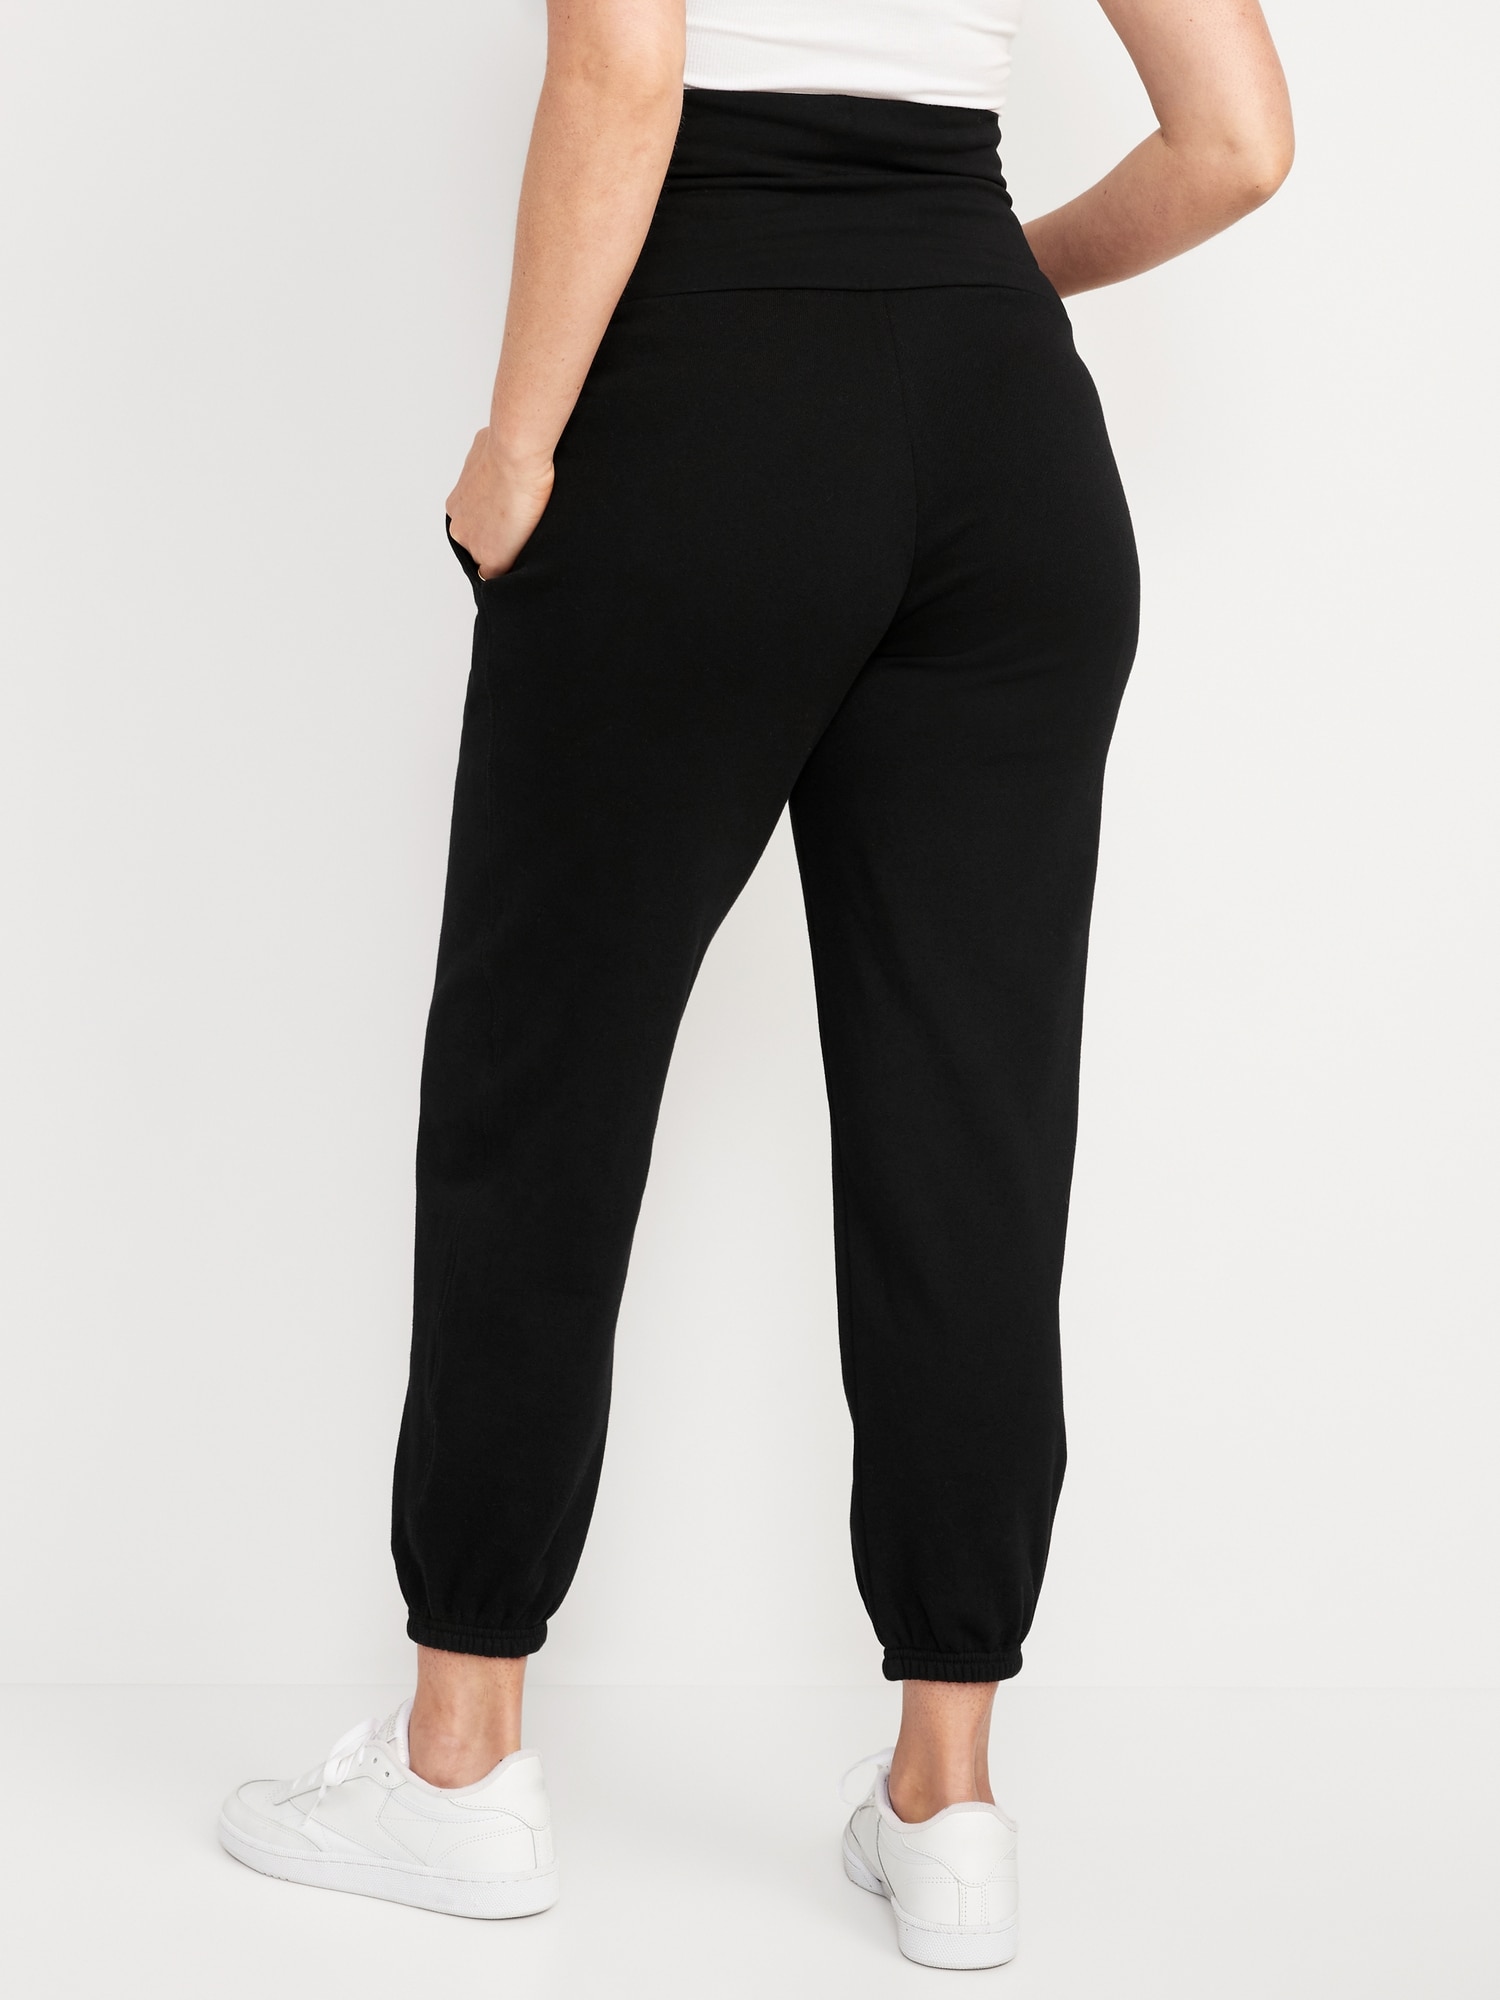 gvdentm Maternity Pants Women's Twill Jogger Pants - Casual Casual